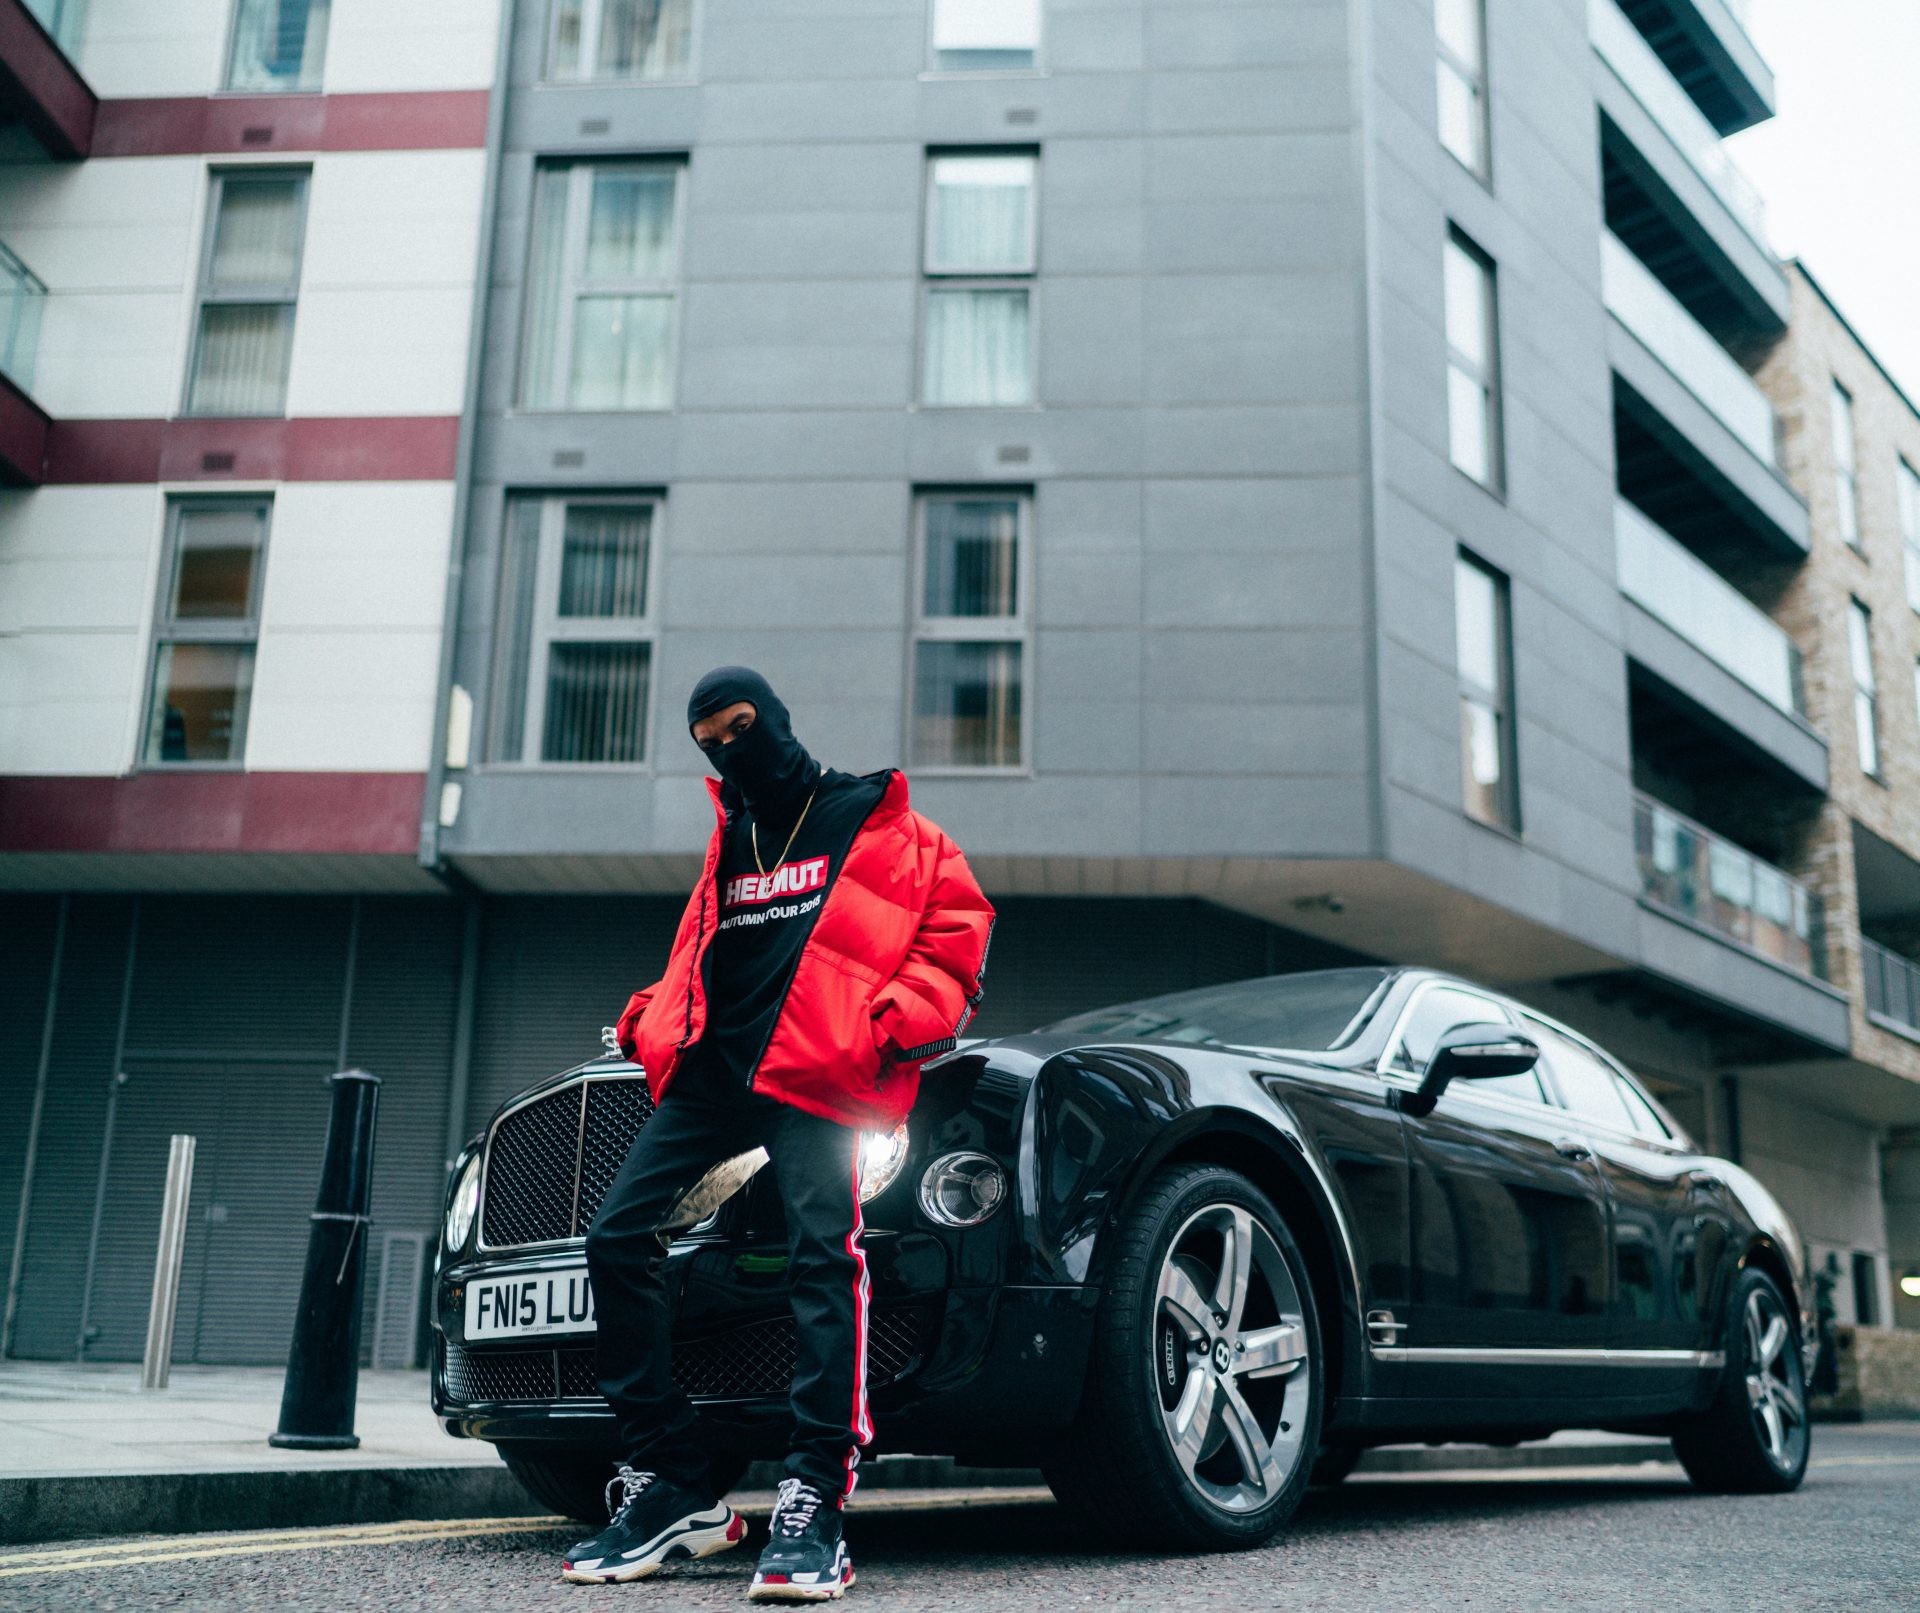 1920x1613 man in red jacket standing in front of black car wallpaper